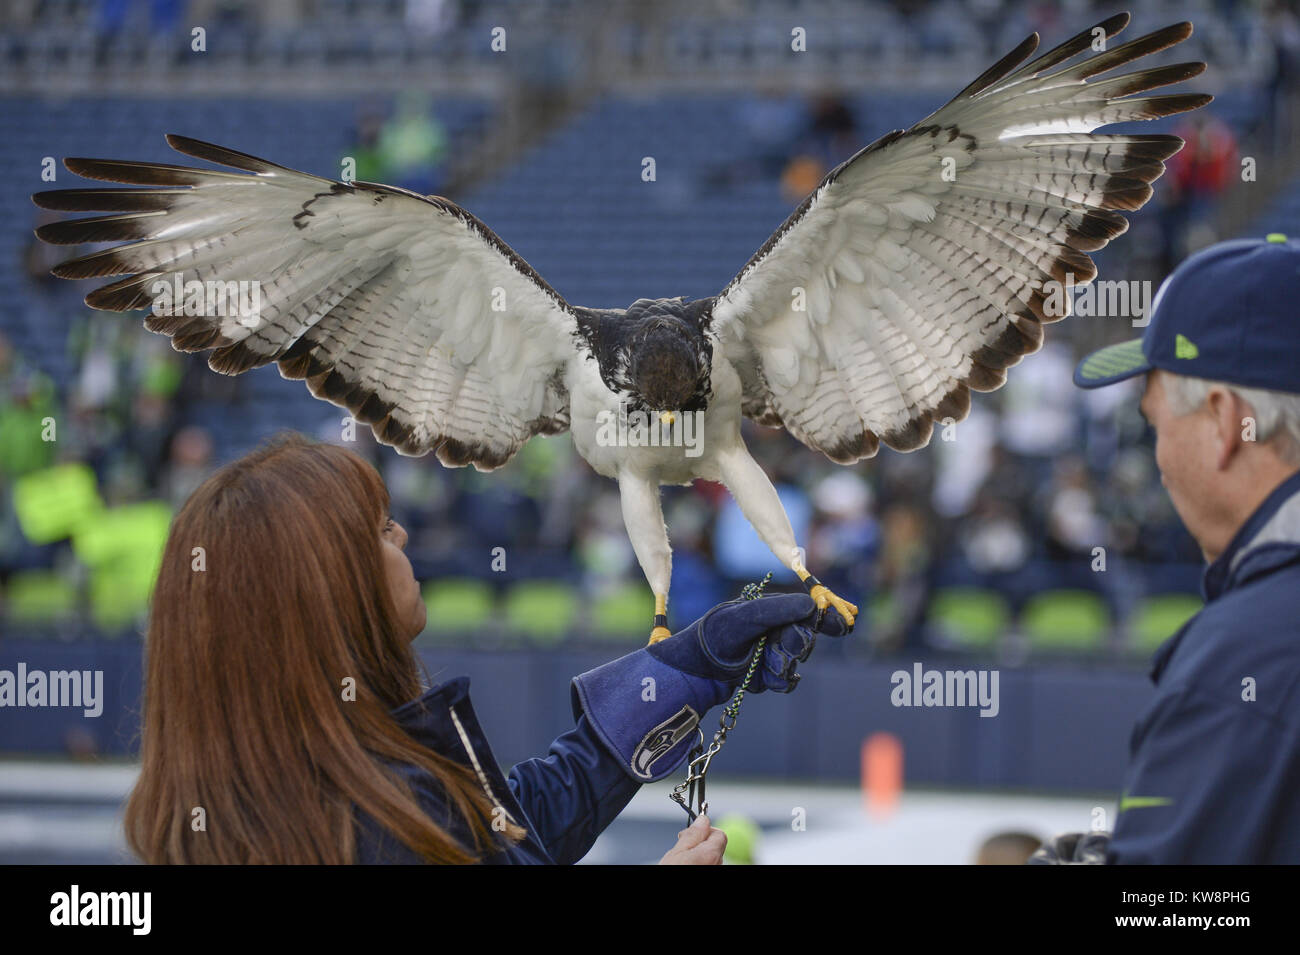 Seattle, Washington, USA. 31st Dec, 2017. TAIMA the Seattle Seahawks mascot settles in during pre-game activities as the Arizona Cardinals play the Seattle Seahawks in a NFL game at Century Link Field in Seattle, WA. Credit: Jeff Halstead/ZUMA Wire/Alamy Live News Stock Photo